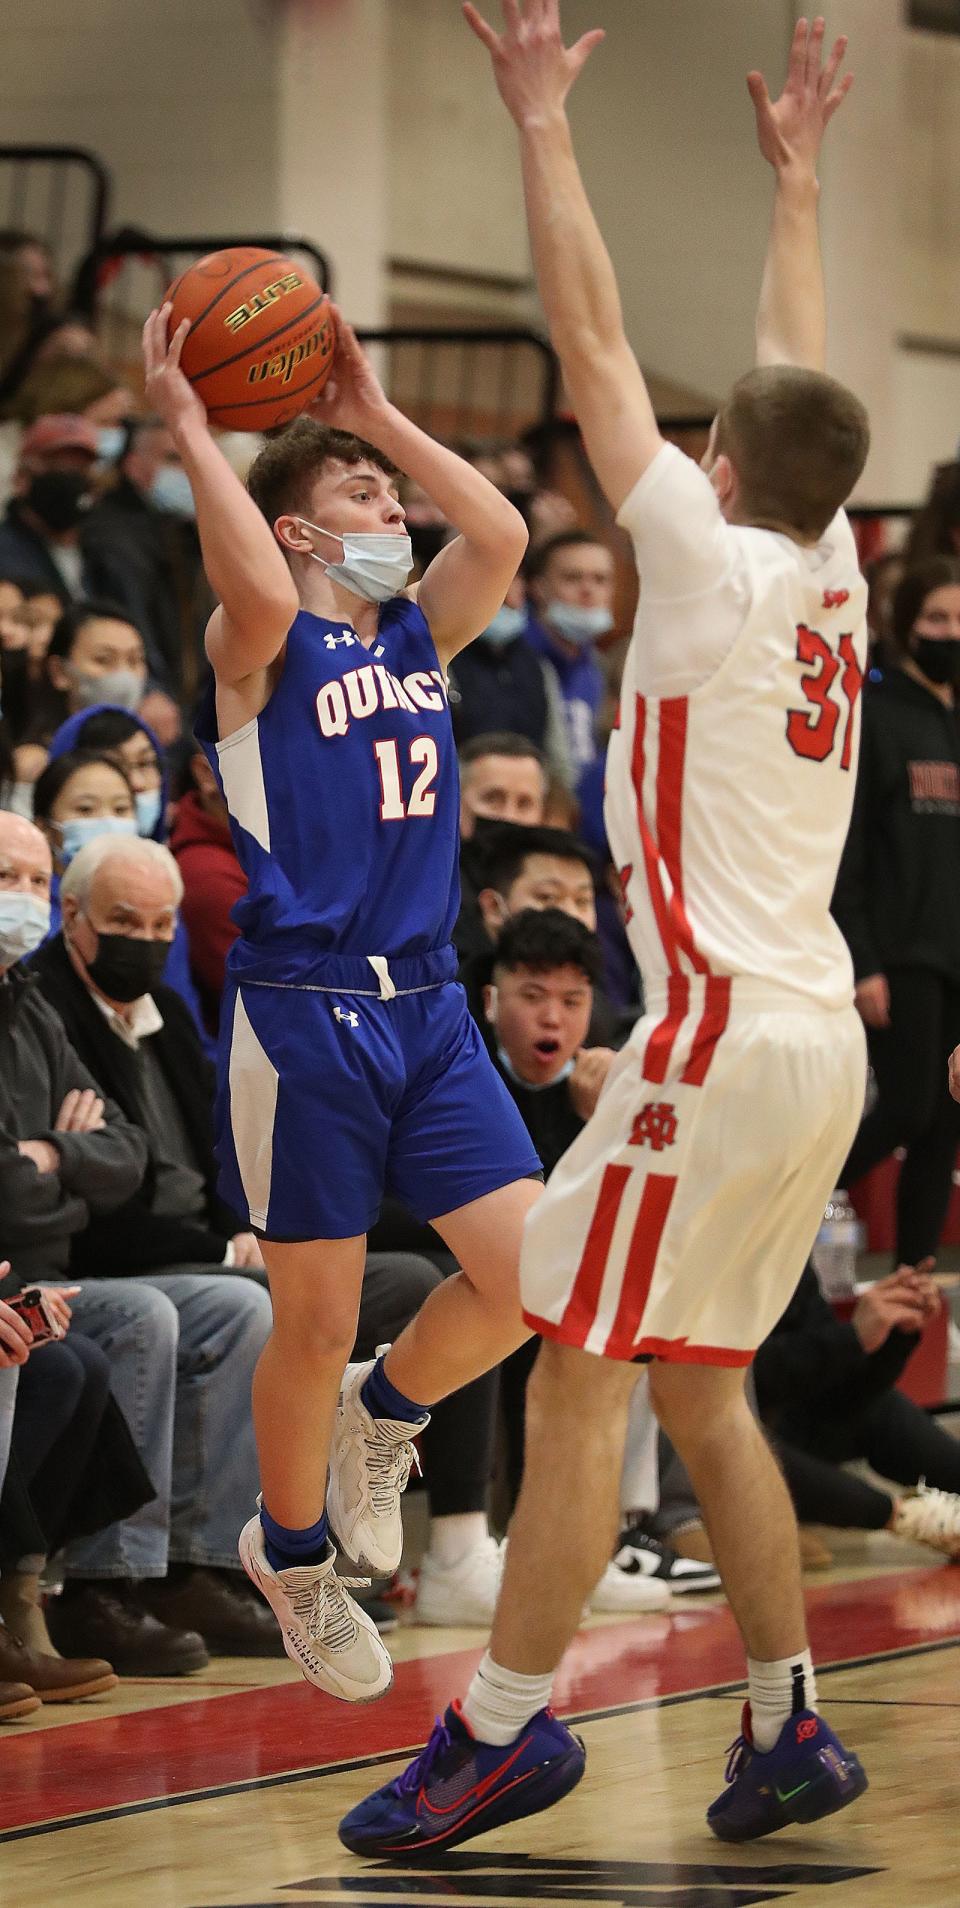 Quincy's Jimmy Phipps, left, tries to pass over North Quincy's Zach Taylor. North Quincy hosted Quincy in boys basketball on Friday, Jan. 21, 2022.